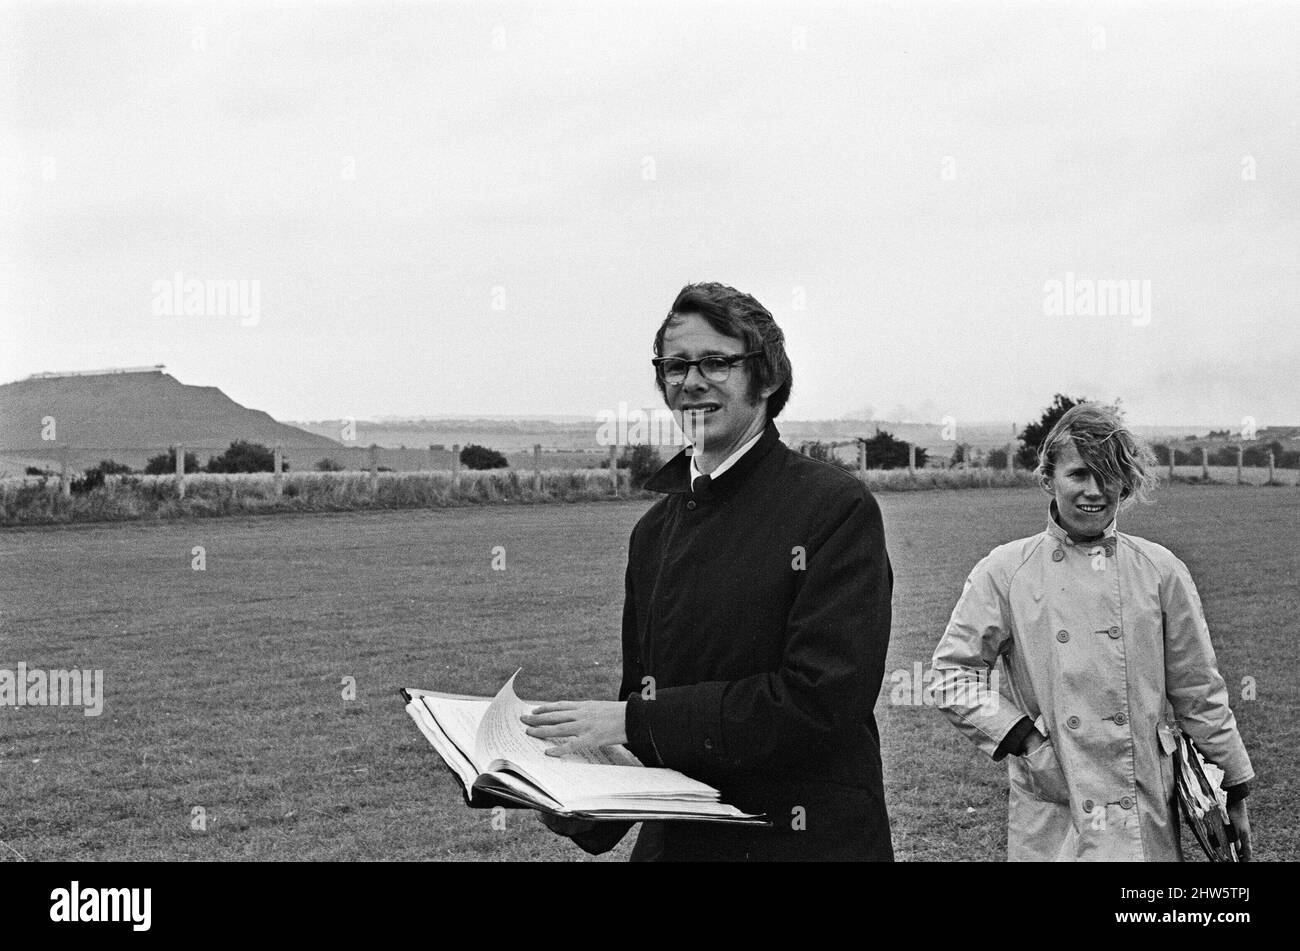 Ken Loach, (film director) on the school football playing field, during the filming of the football scene in the film Kes. David Bradley, (aged 14) plays the part of Billy Casper, pictured with his Kestral, on the film set of the film Kes.     Kes is a 1969 release drama film directed by Ken Loach and produced by Tony Garnett. The film is based on the 1968 novel A Kestrel for a Knave, written by the Barnsley-born author Barry Hines. The film is ranked seventh in the British Film Institute's Top Ten (British) Films and among the top ten in its list of the 50 films you should see by the age of 1 Stock Photo